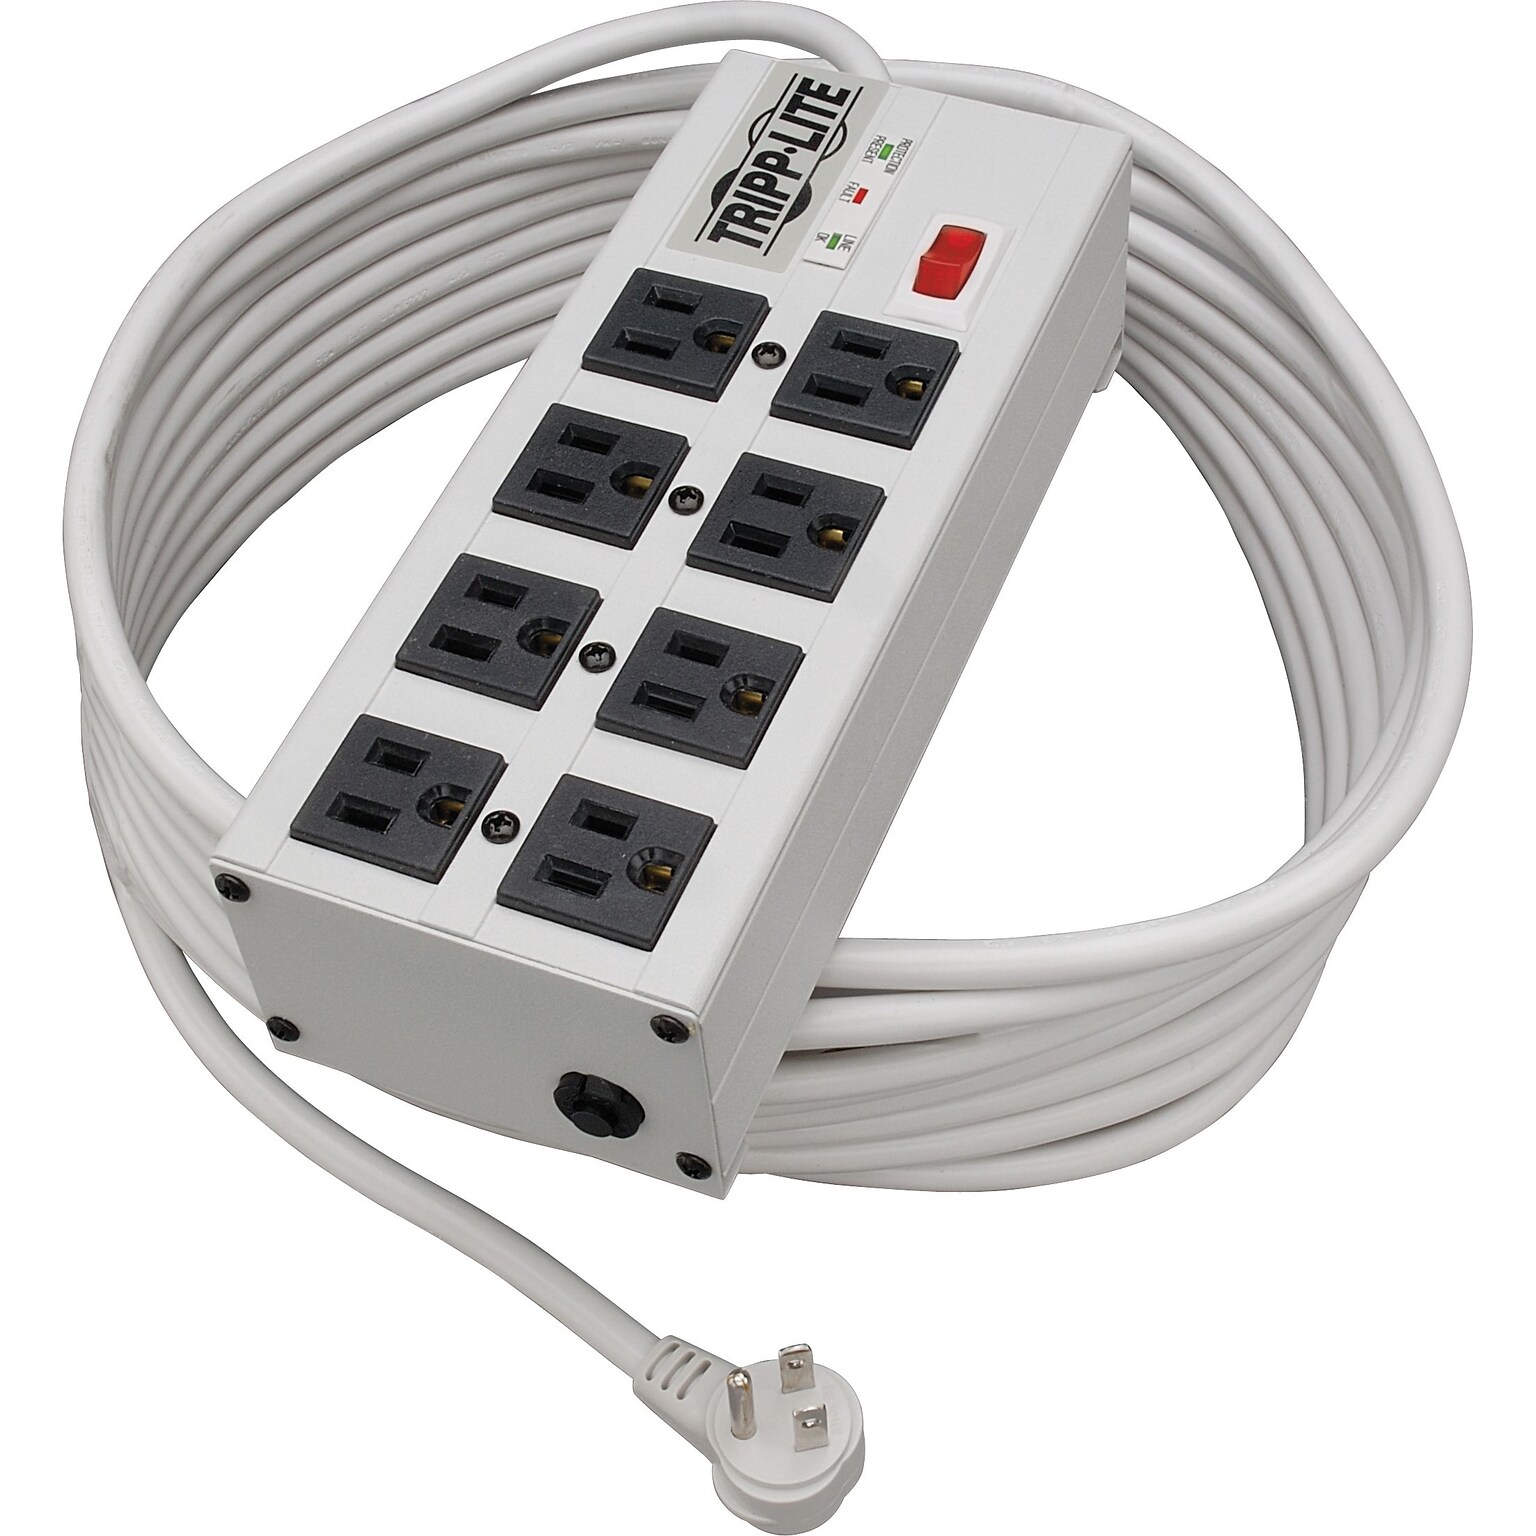 Tripp Lite 8 Outlet Surge Protector, 25 Cord, 3840 Joules (ISOBAR825ULTRA)